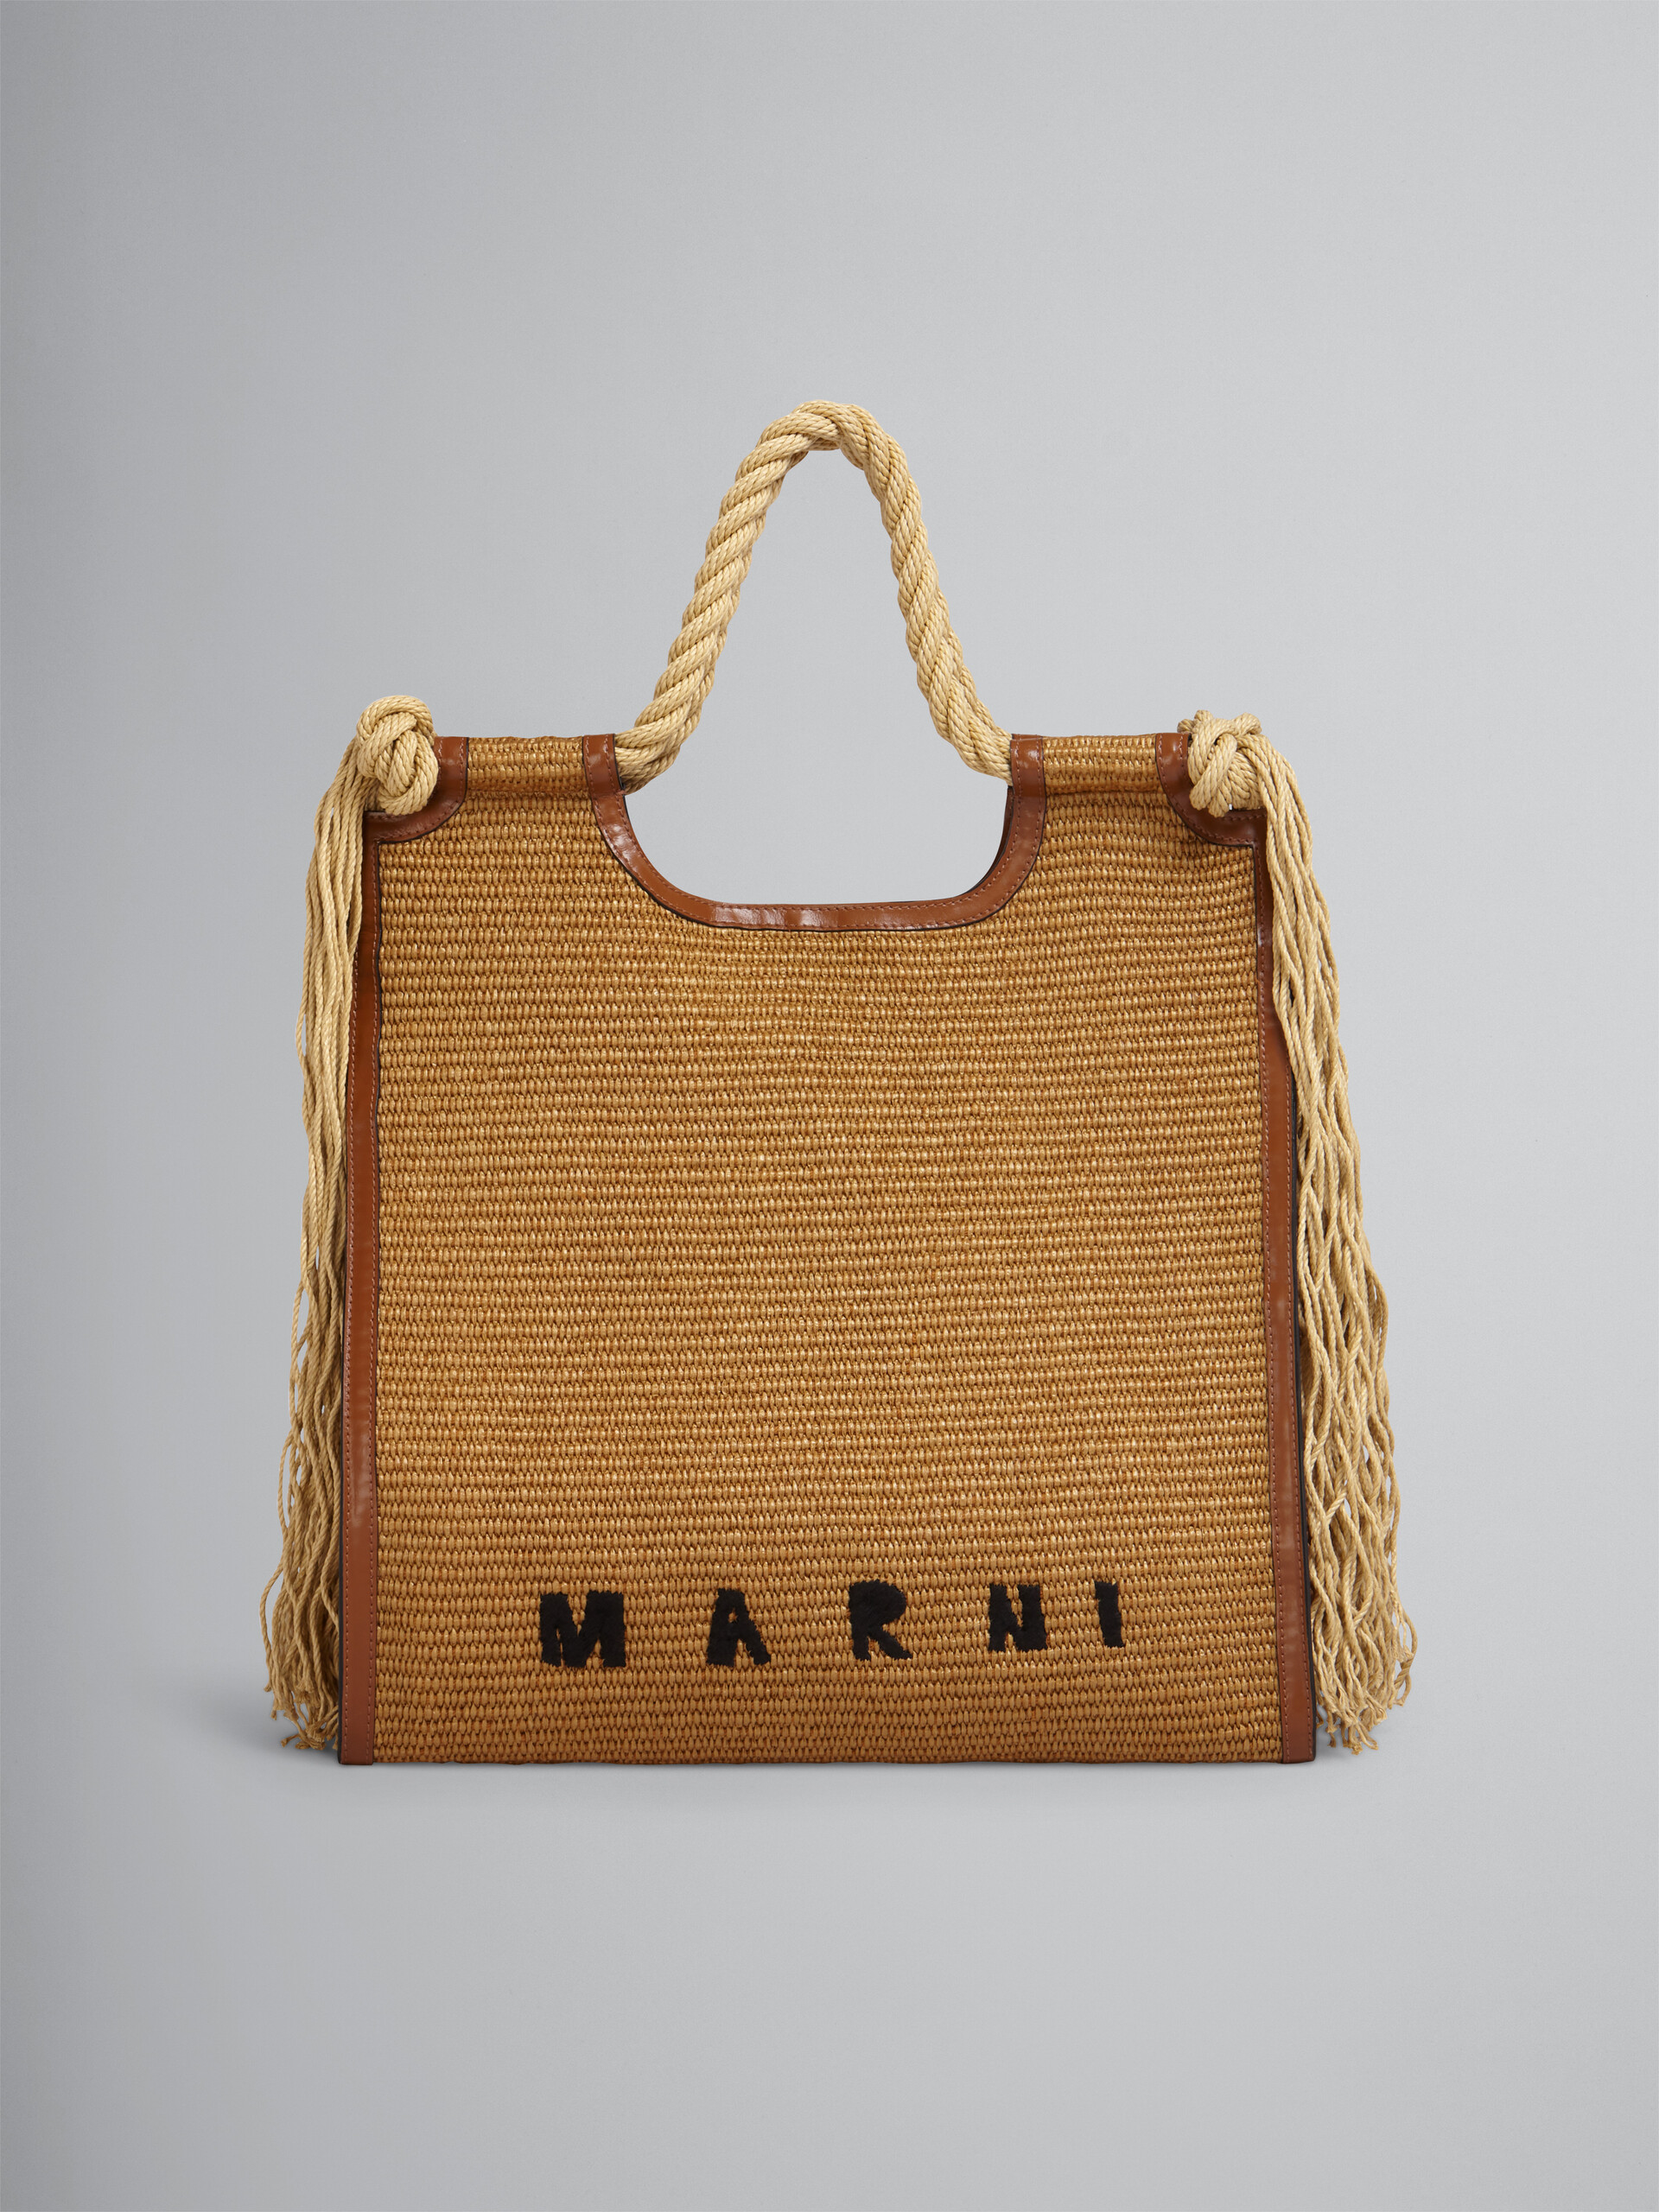 Marcel summer bag in brown leather and raffia with rope handles - Handbag - Image 1